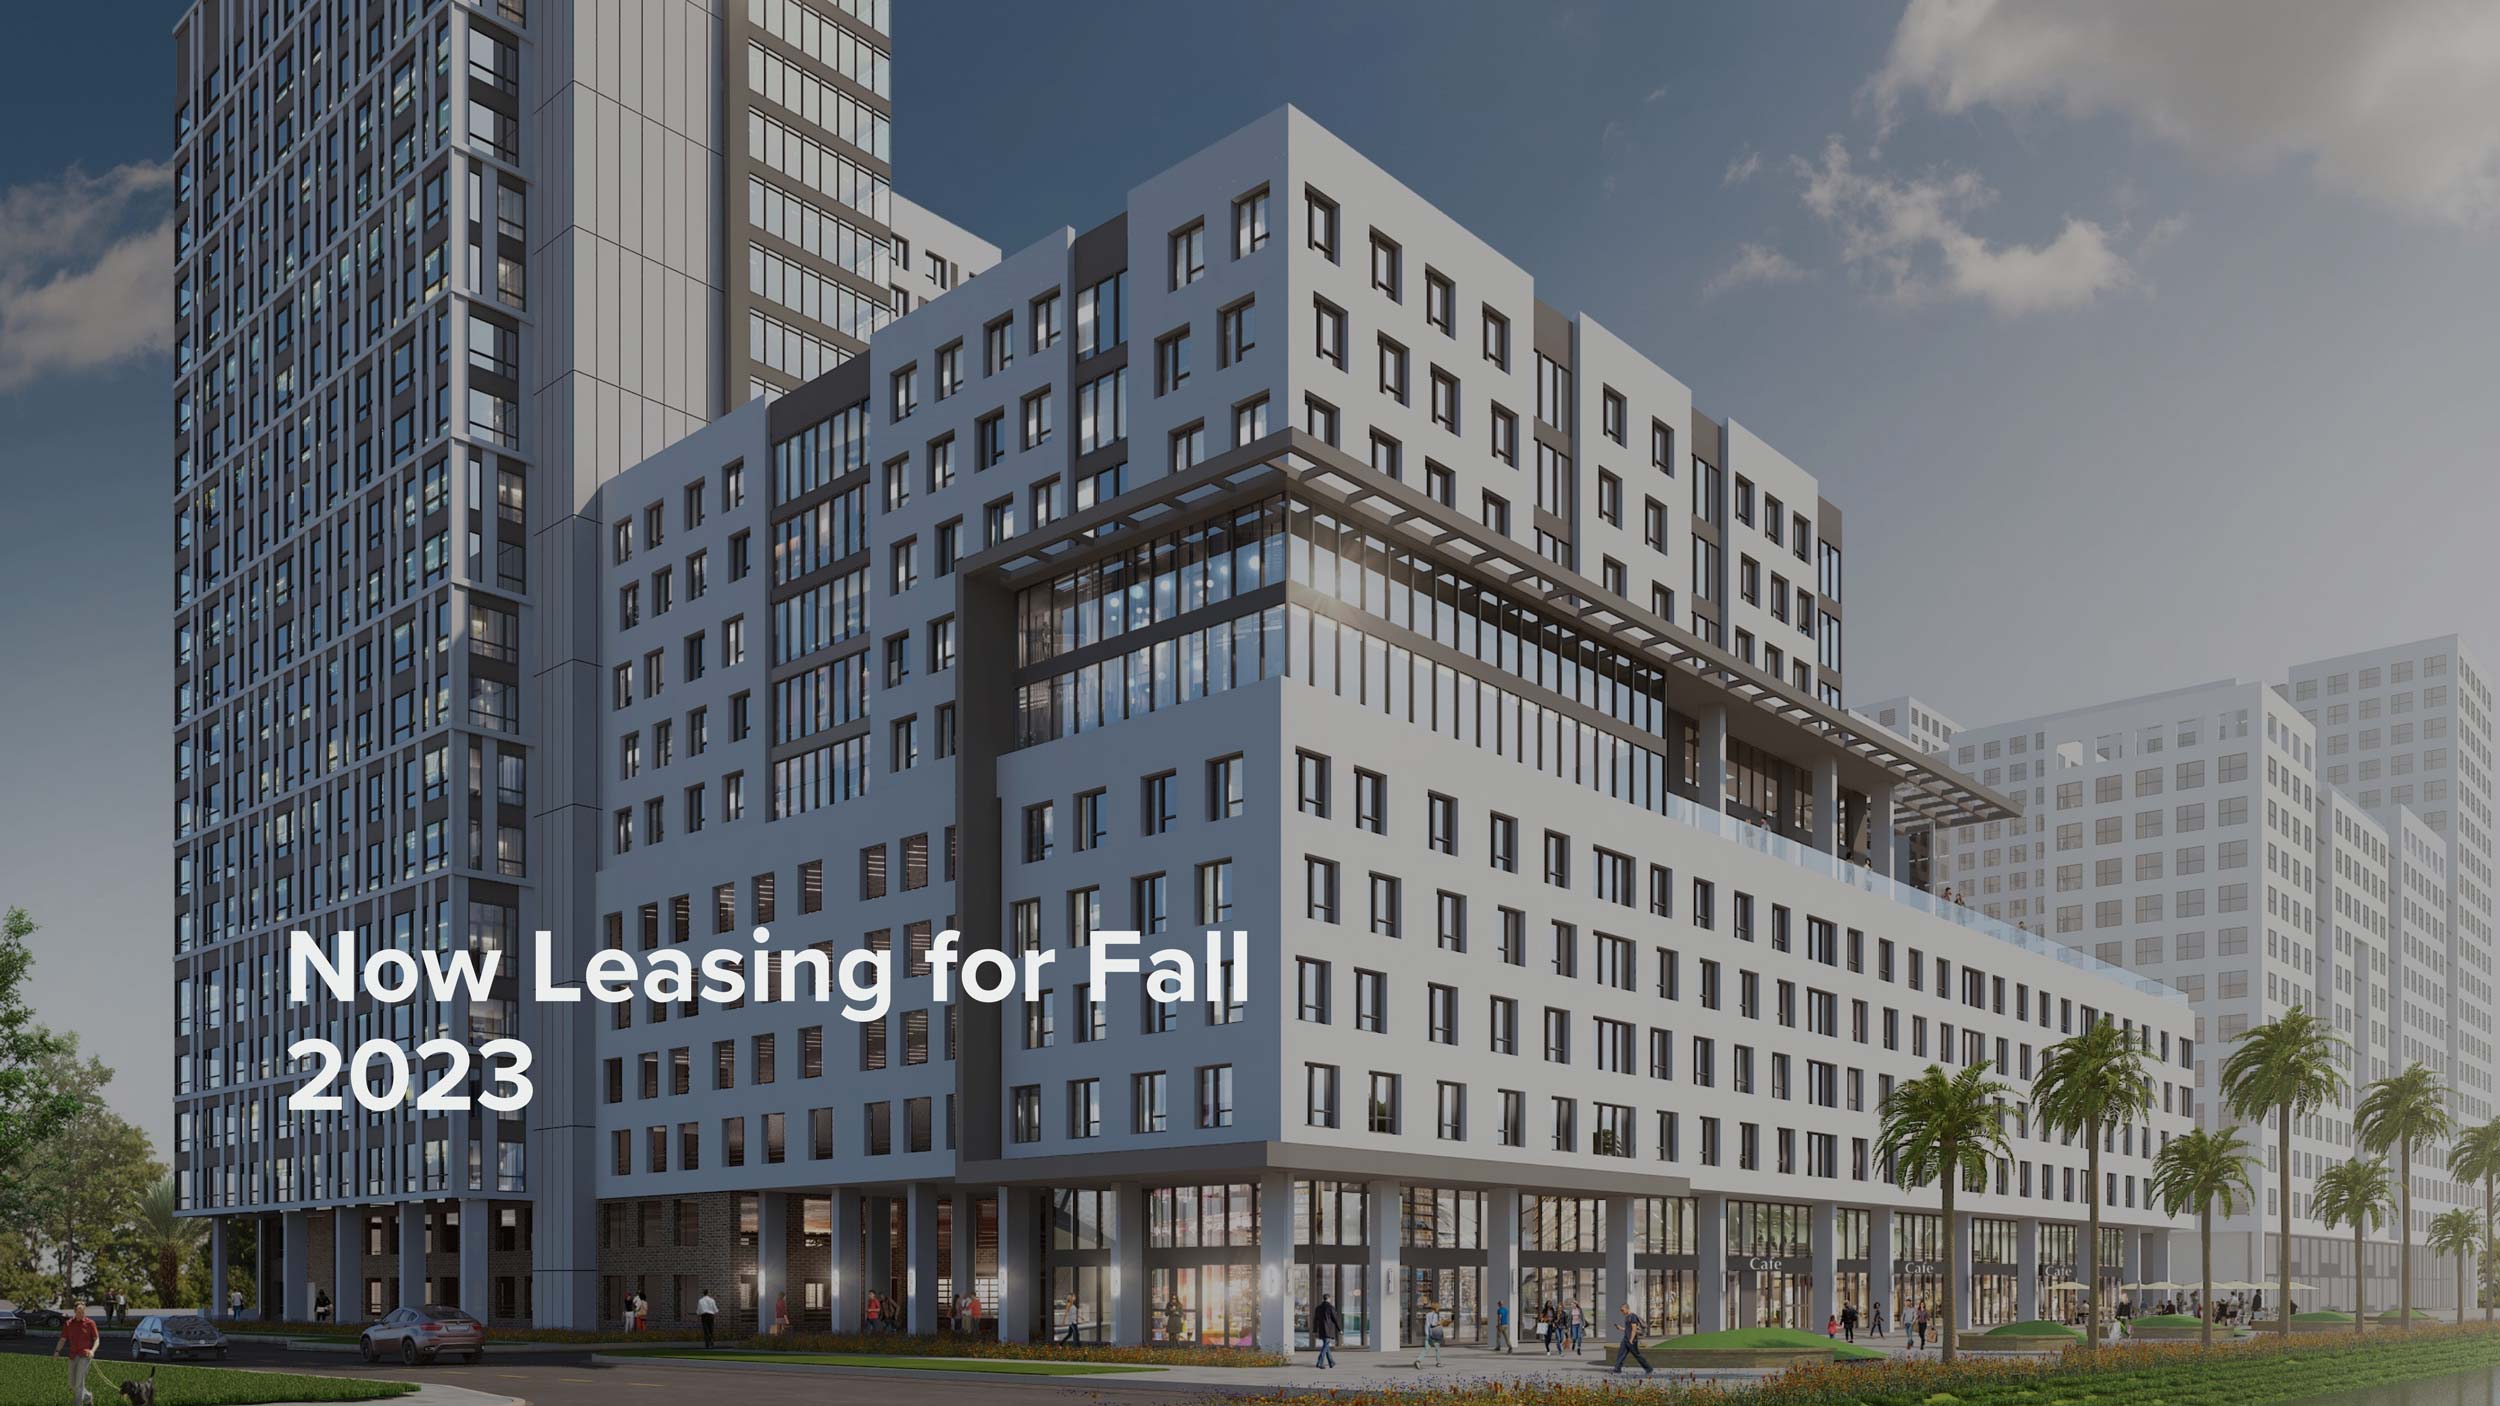 Lapis exterior. Text: Now leasing for fall 2023